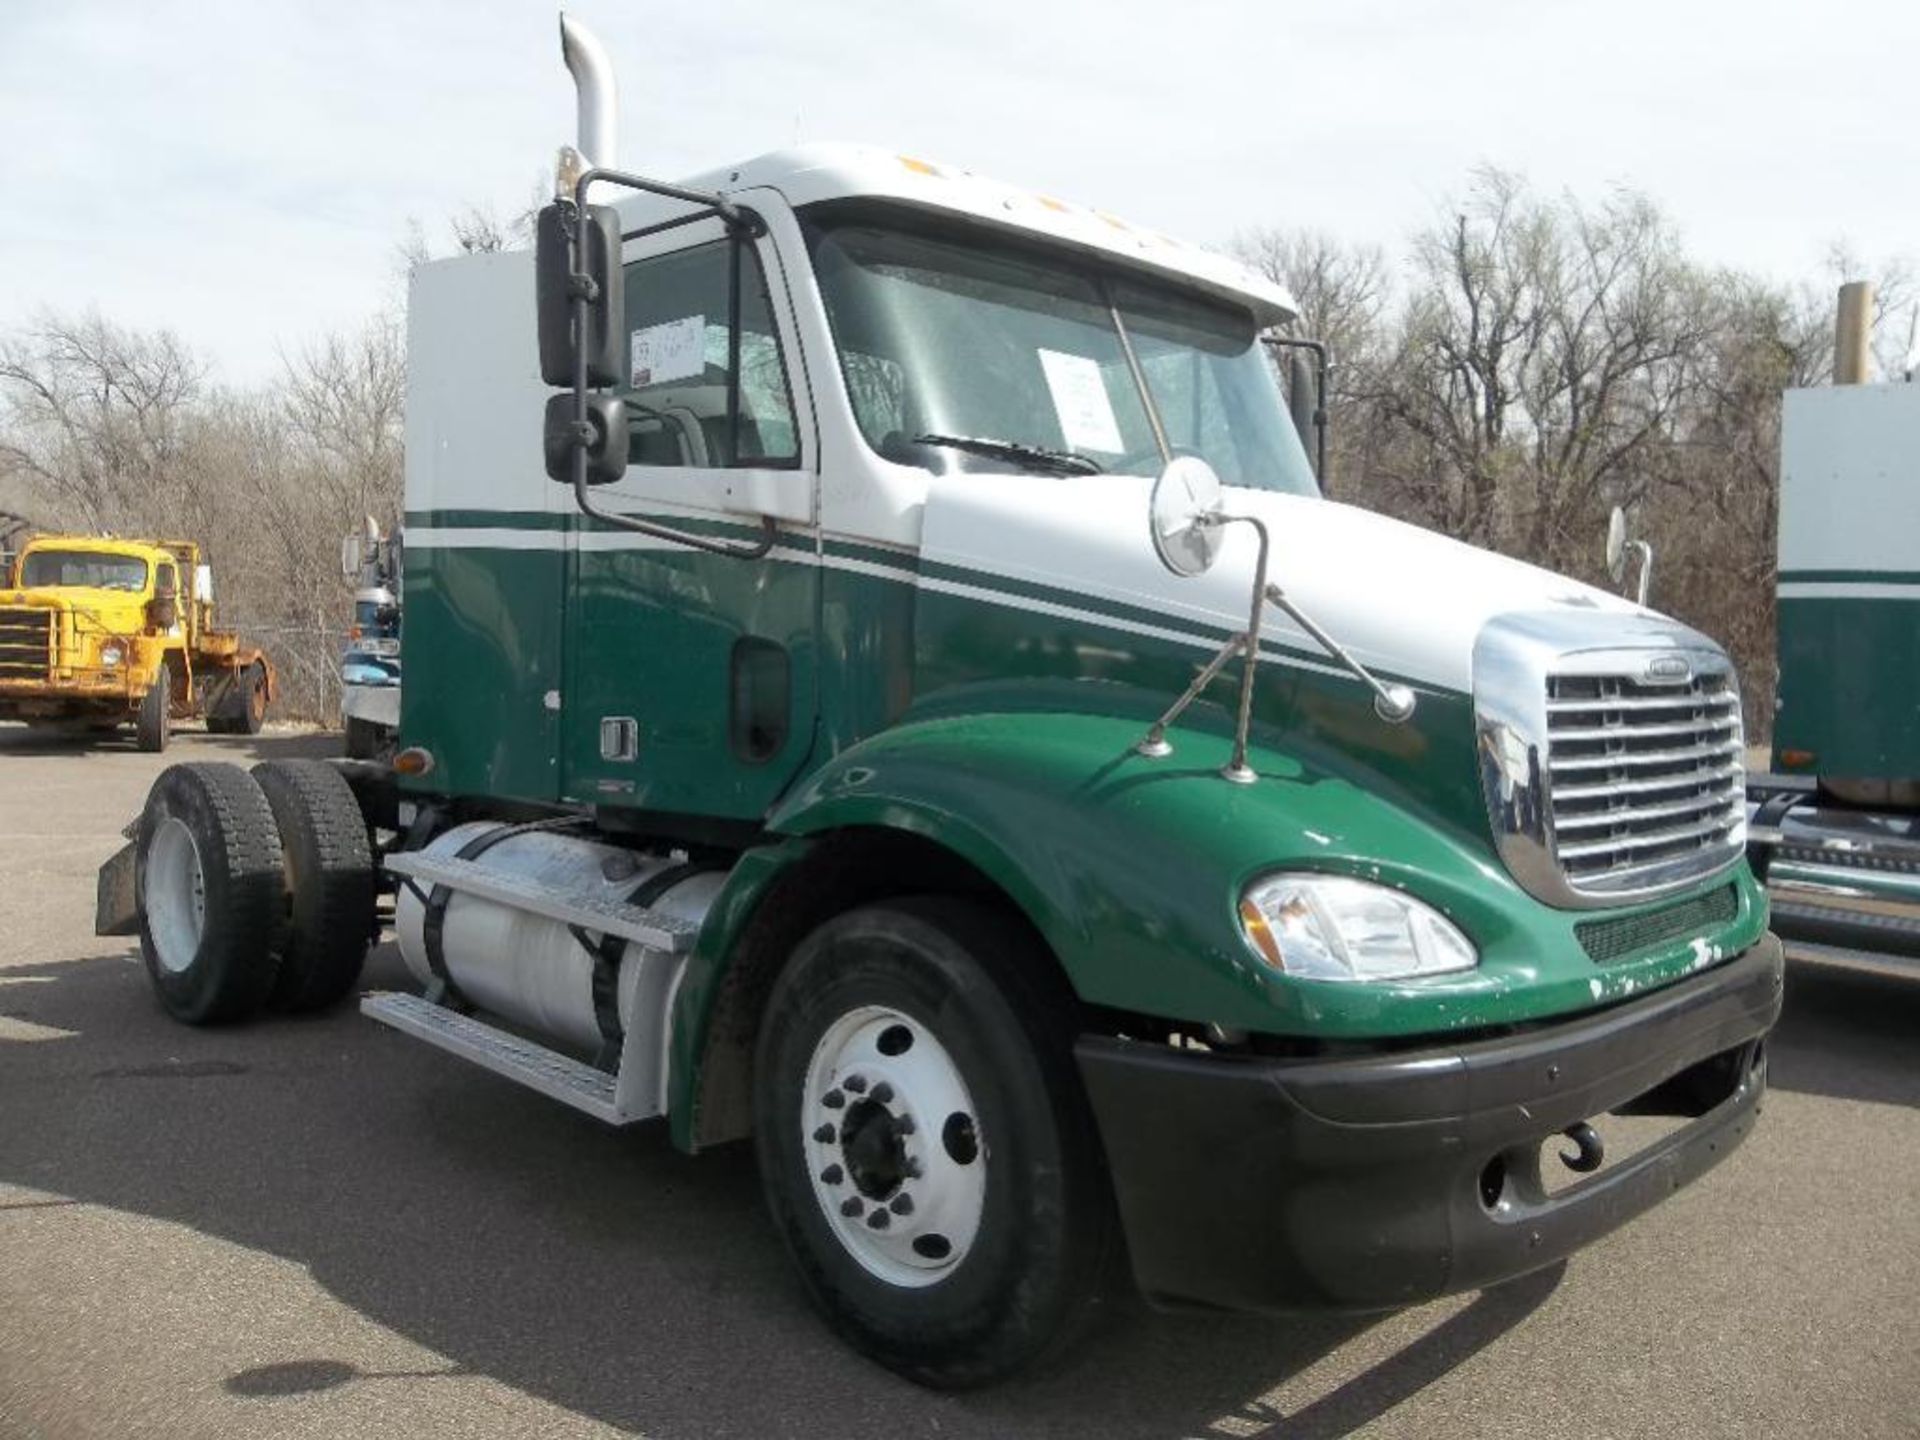 2006 Freightliner s/a Truck Tractor s/n 1fubf9de57lw70940, cat c13 eng, 10 spd trans, a/r , od reads - Image 2 of 6